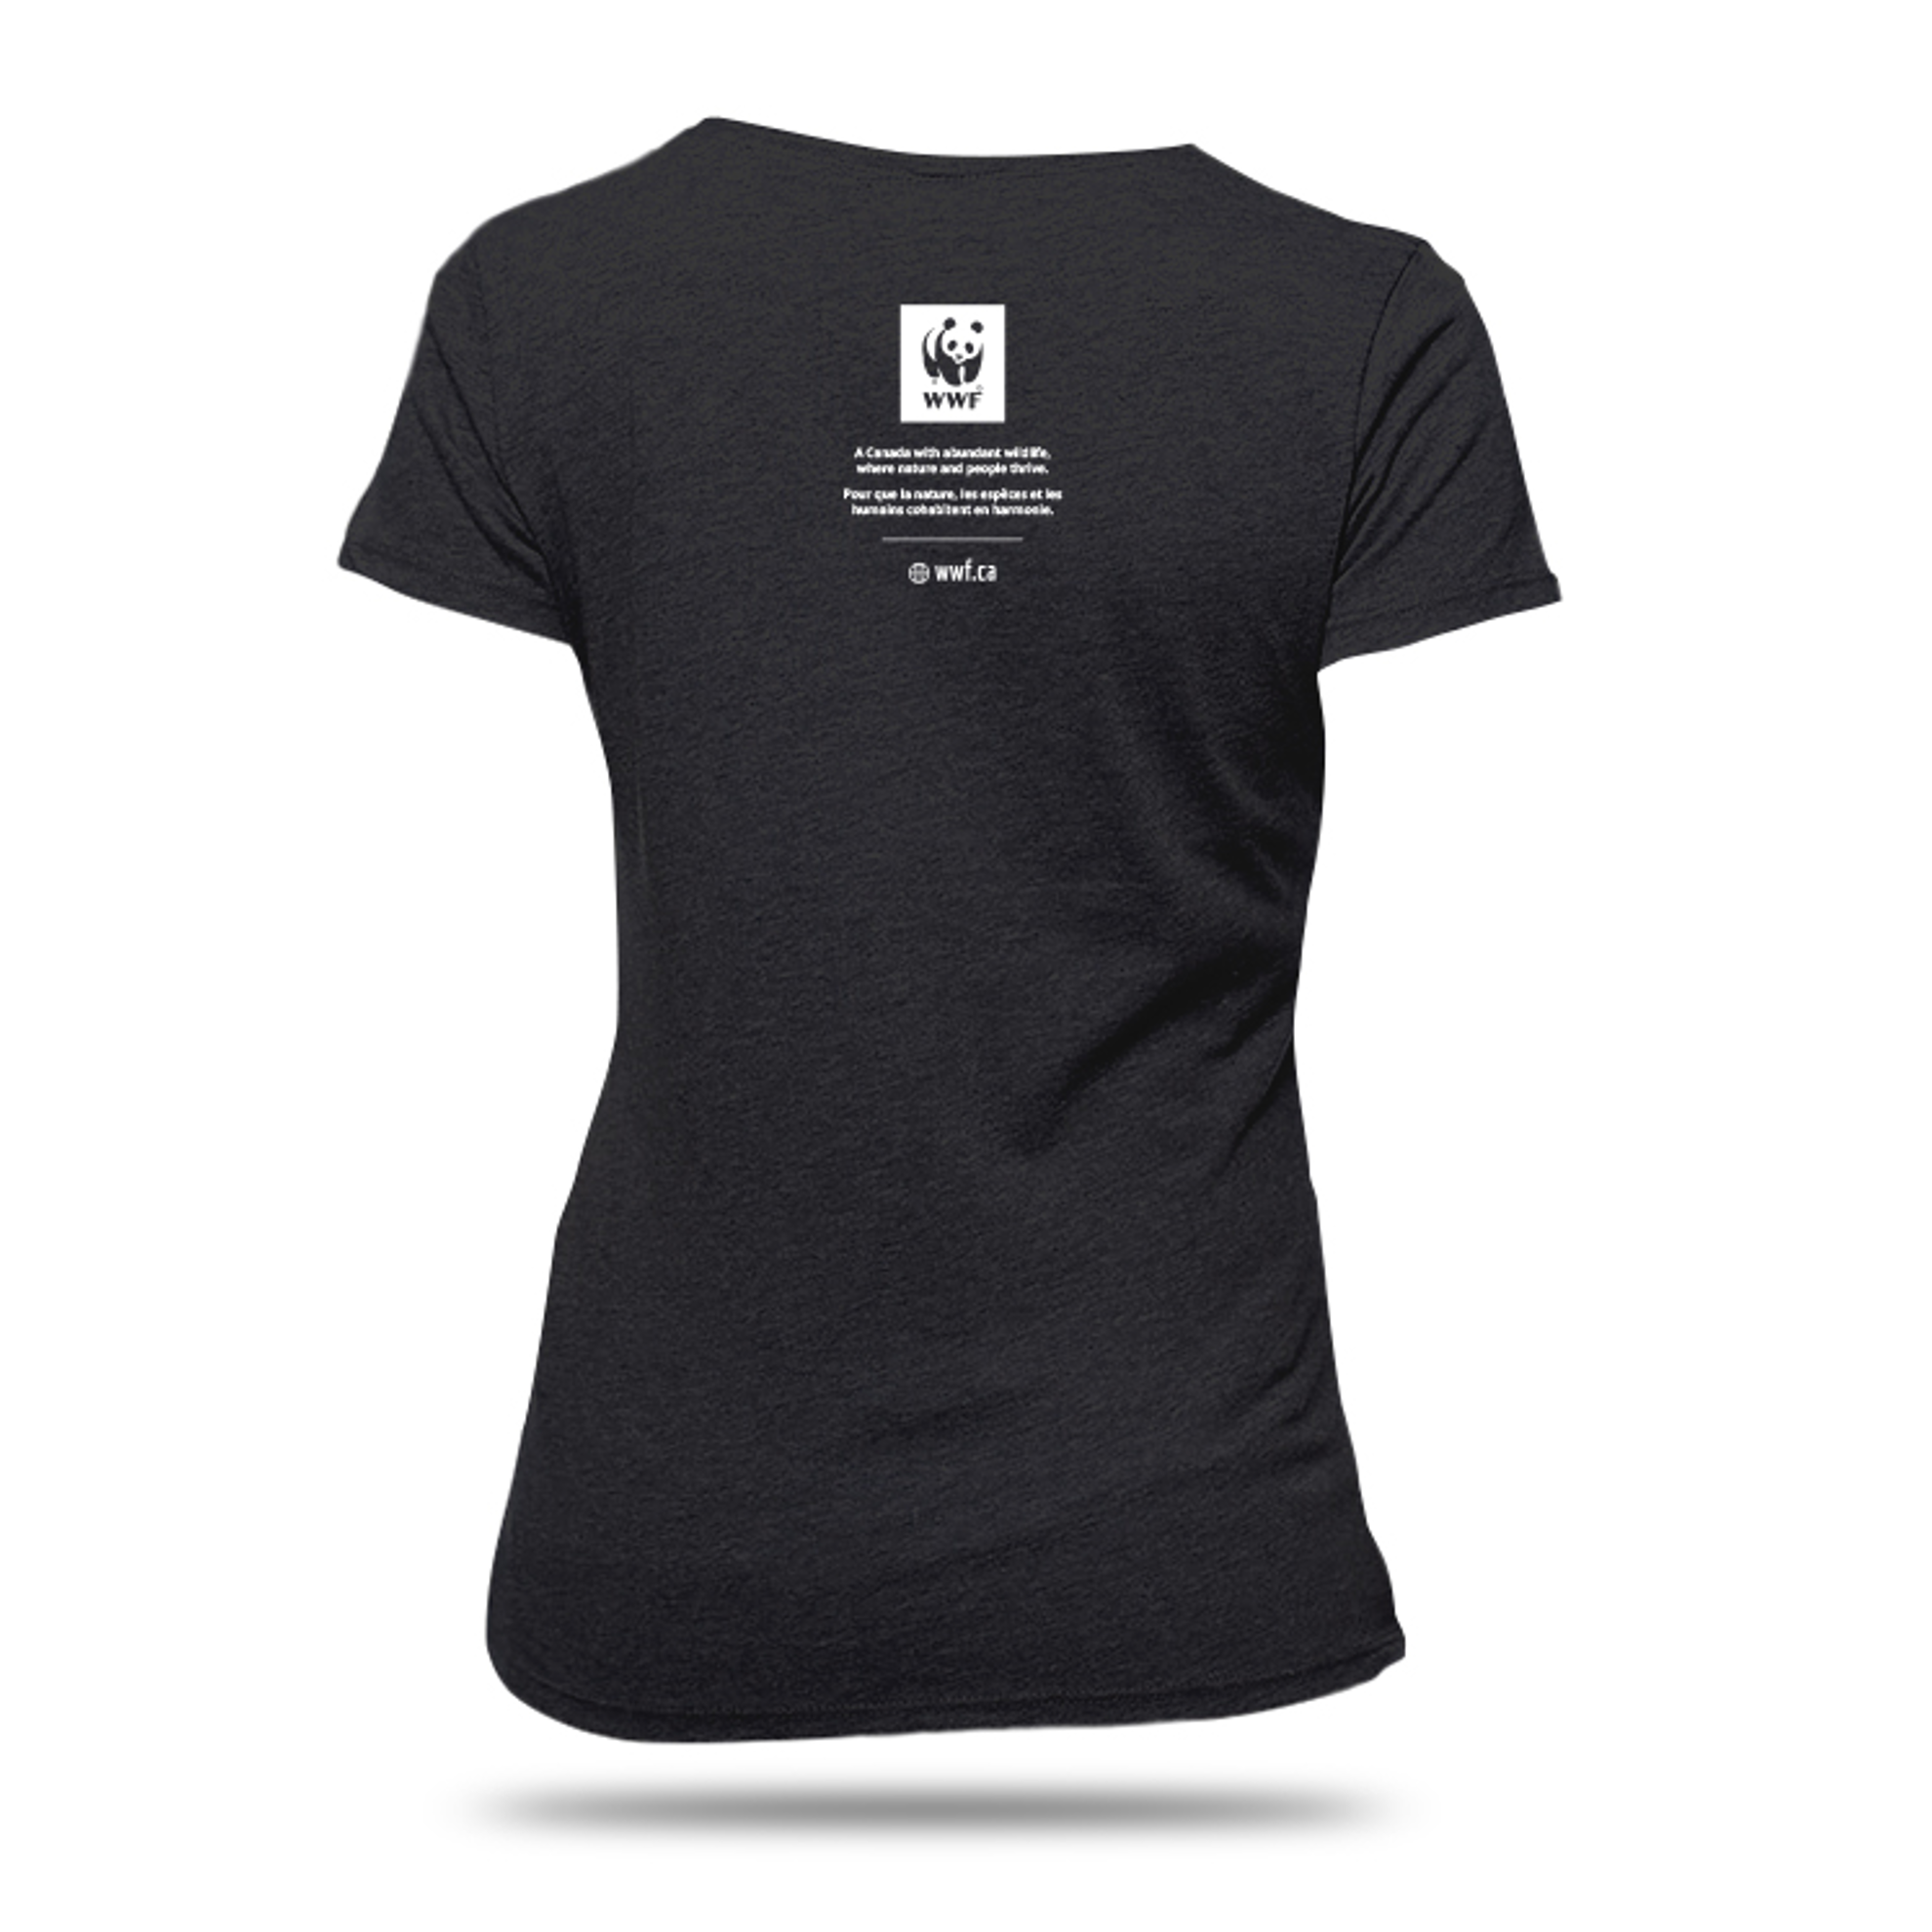 Back side of the women's black t-shirt featuring the WWF logo